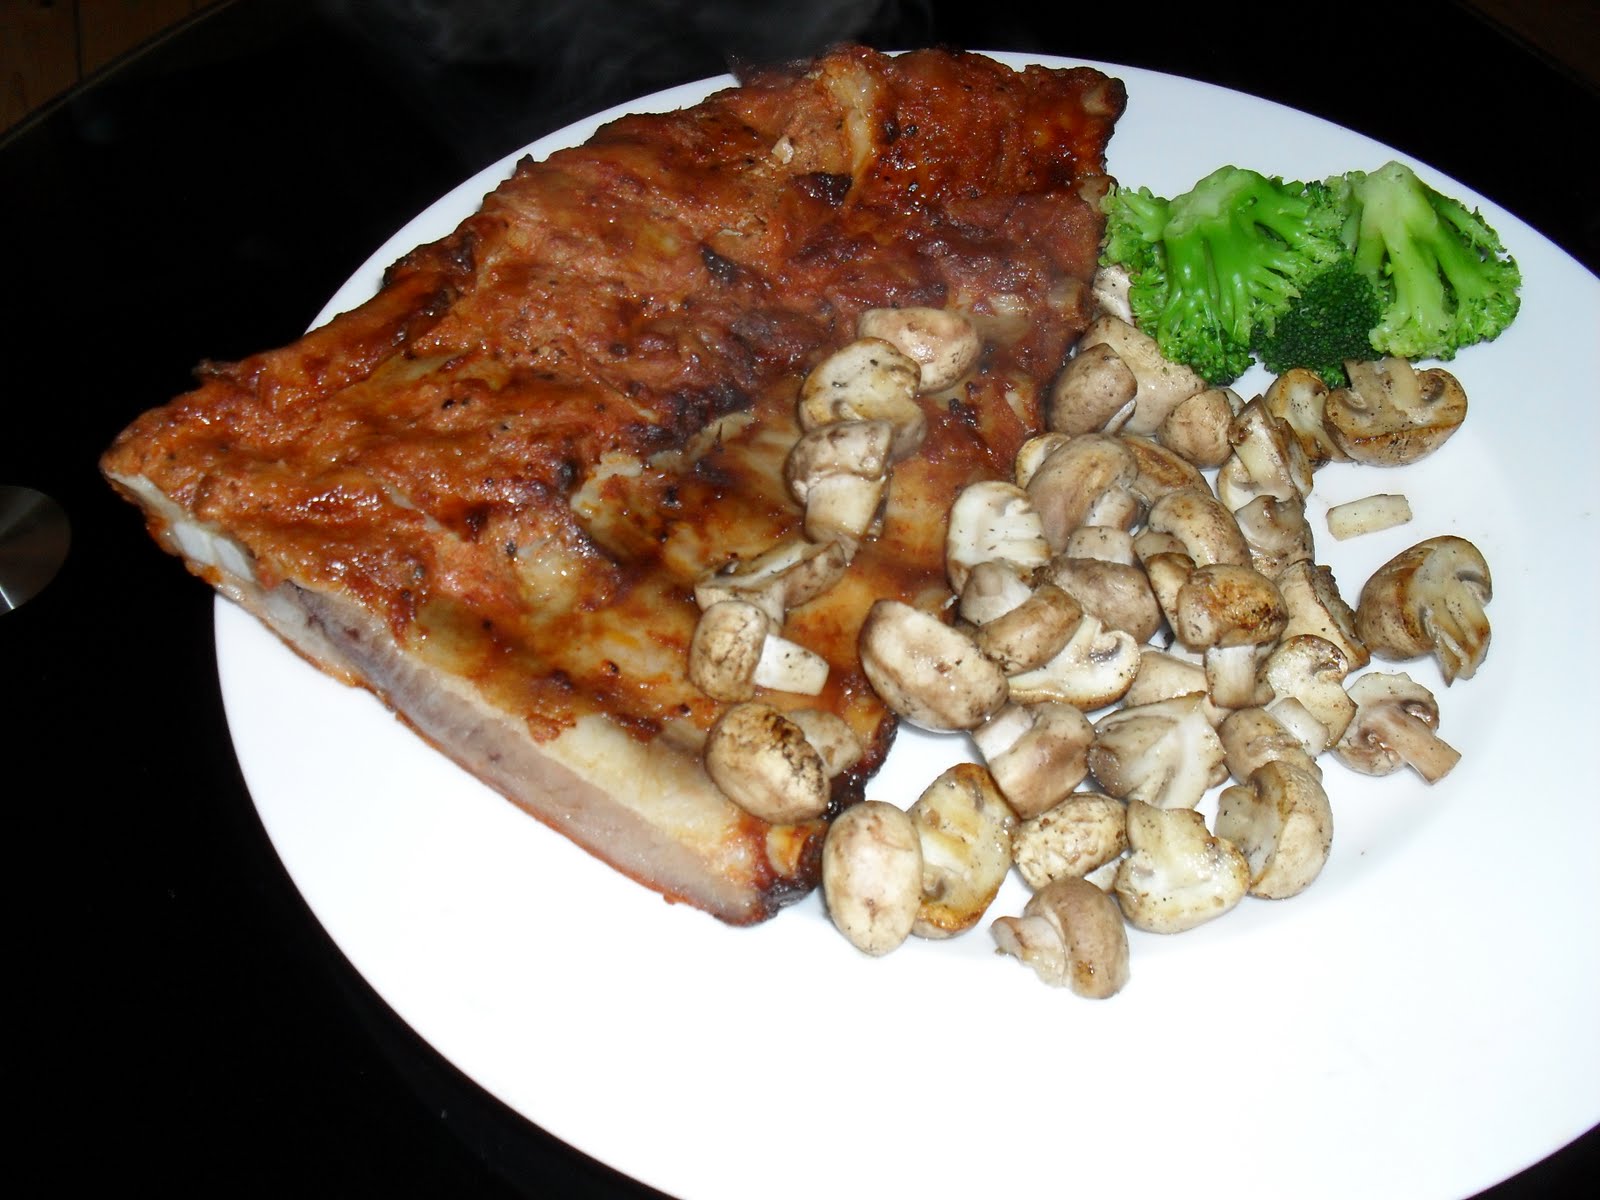 Plate with Grilled pork, mushrooms and Brocoli